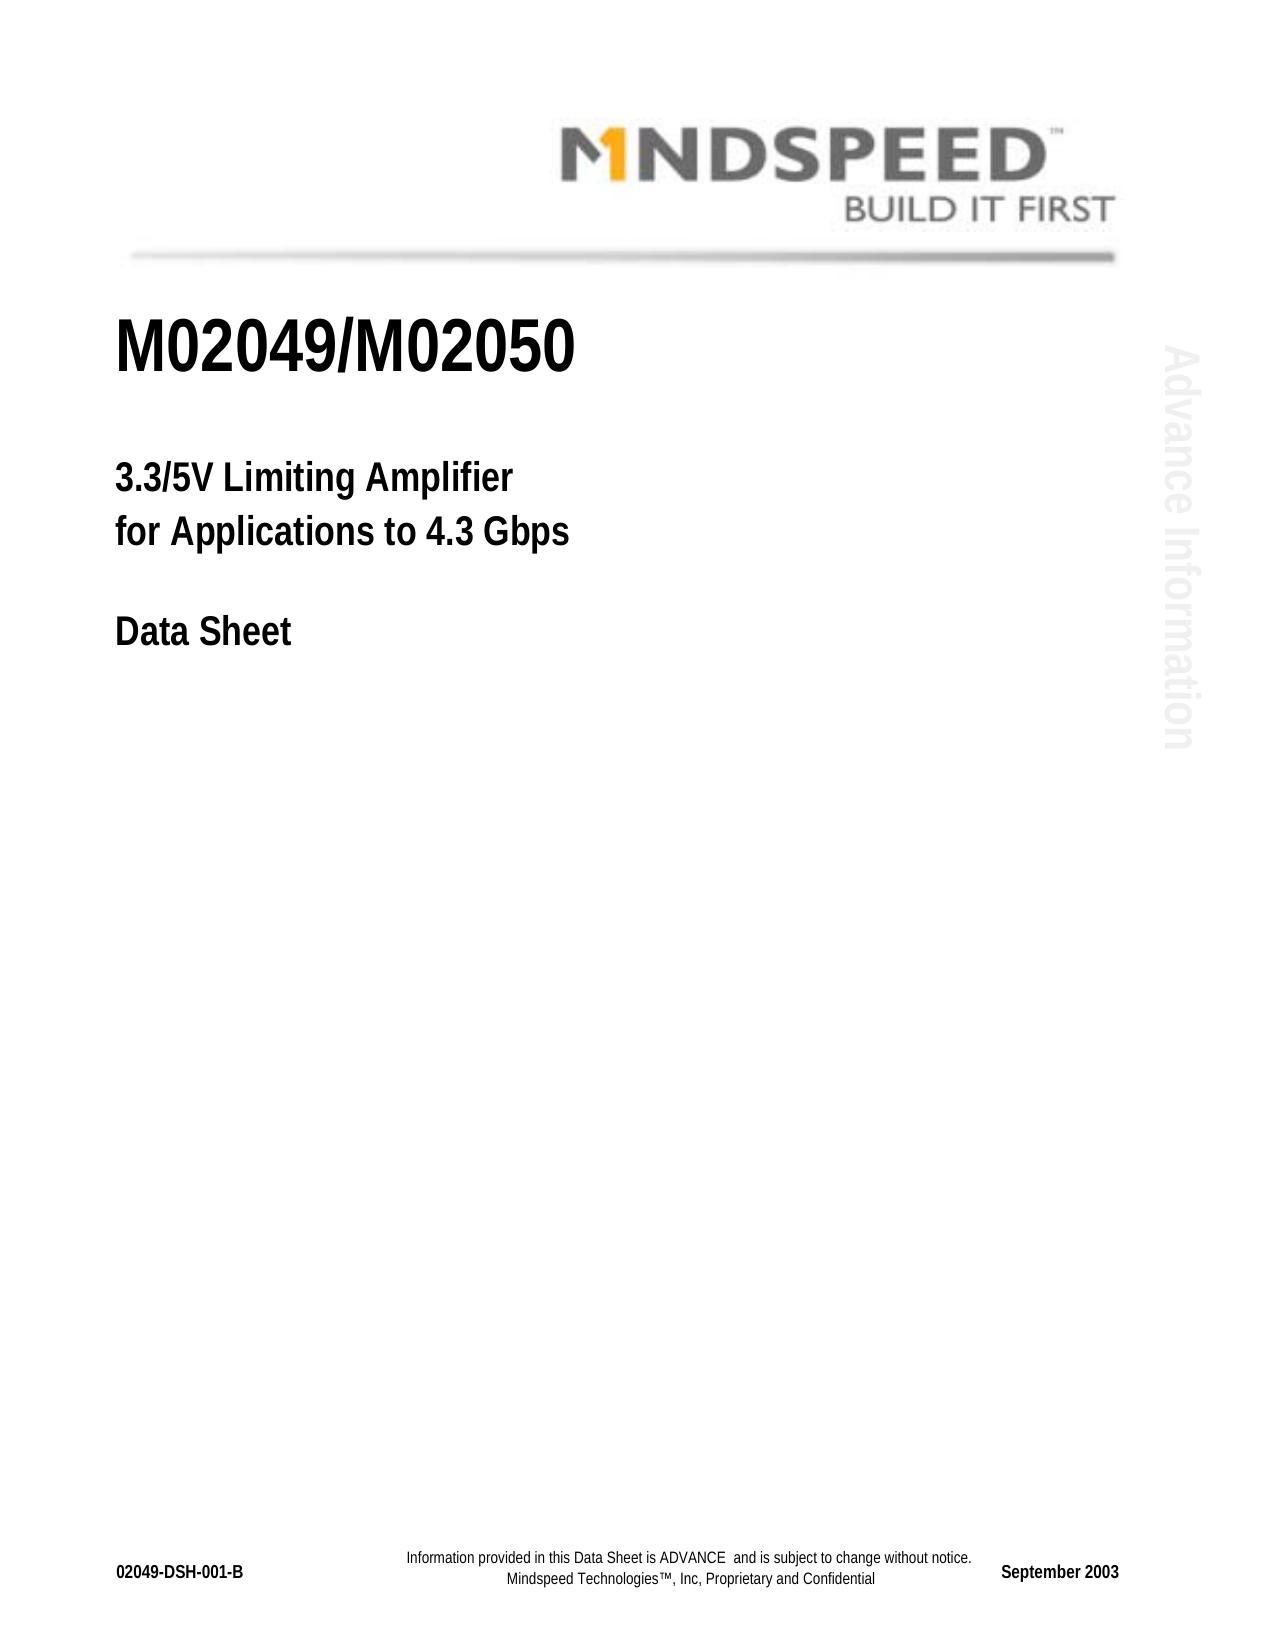 m02049m02050-335v-limiting-amplifier-for-applications-to-43-gbps.pdf